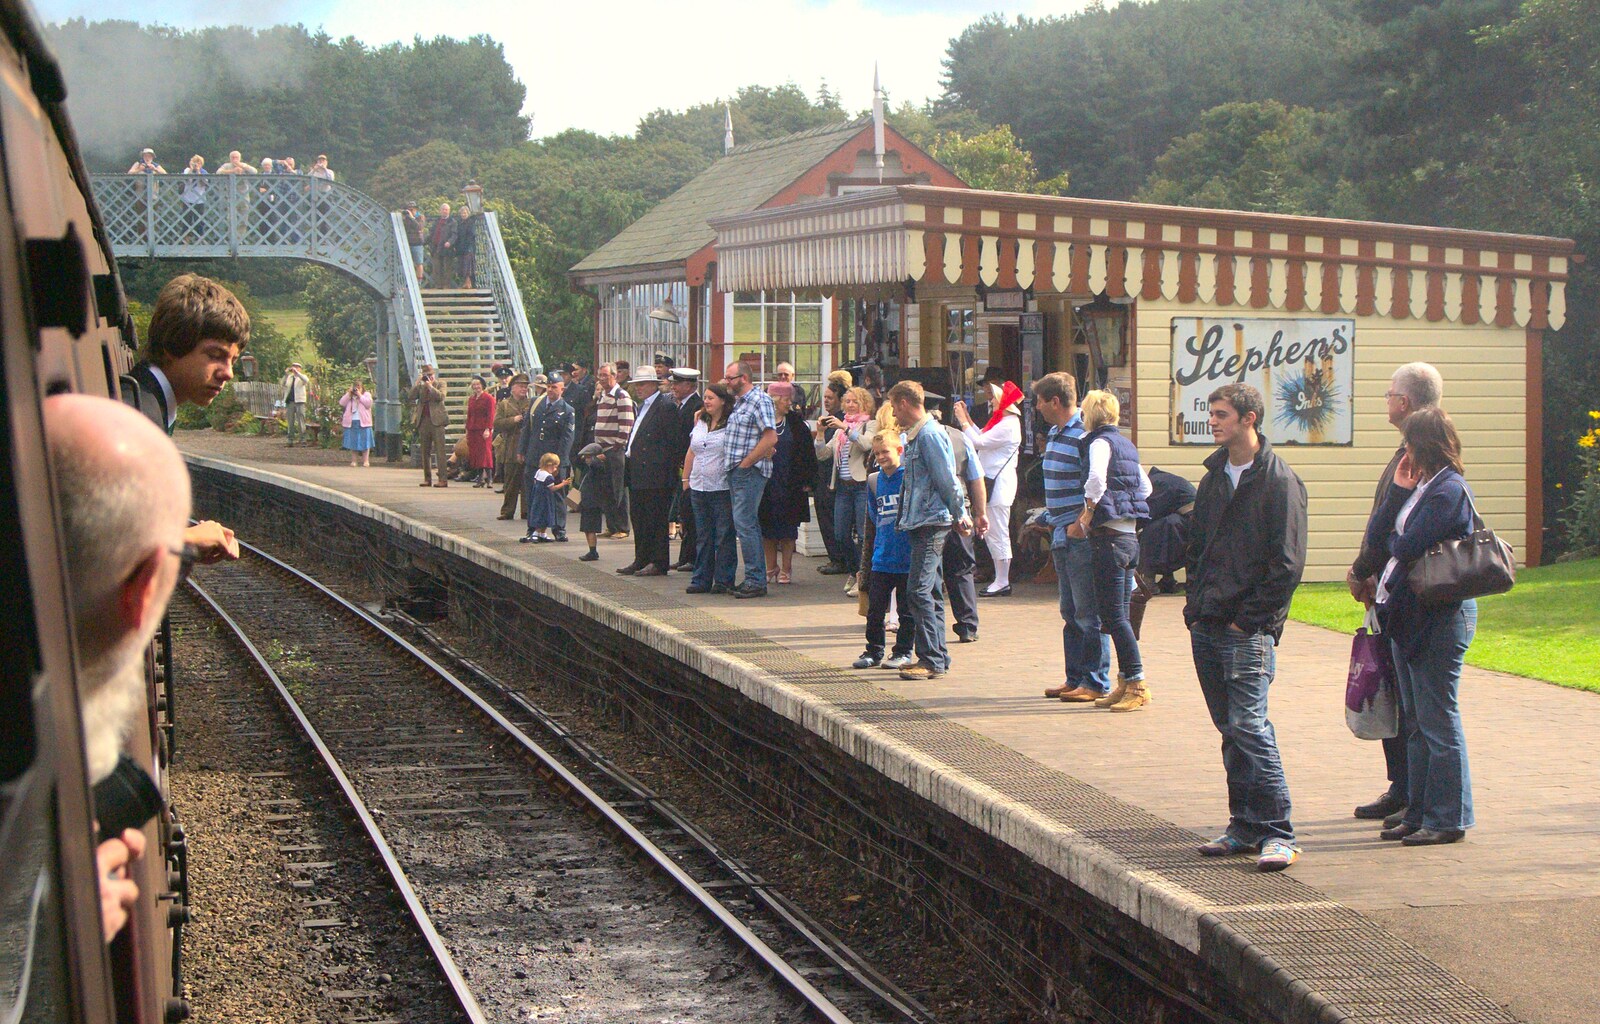 Crowds at Weybourne Station from The 1940s Steam Train Weekend, Holt, Norfolk - 18th September 2011